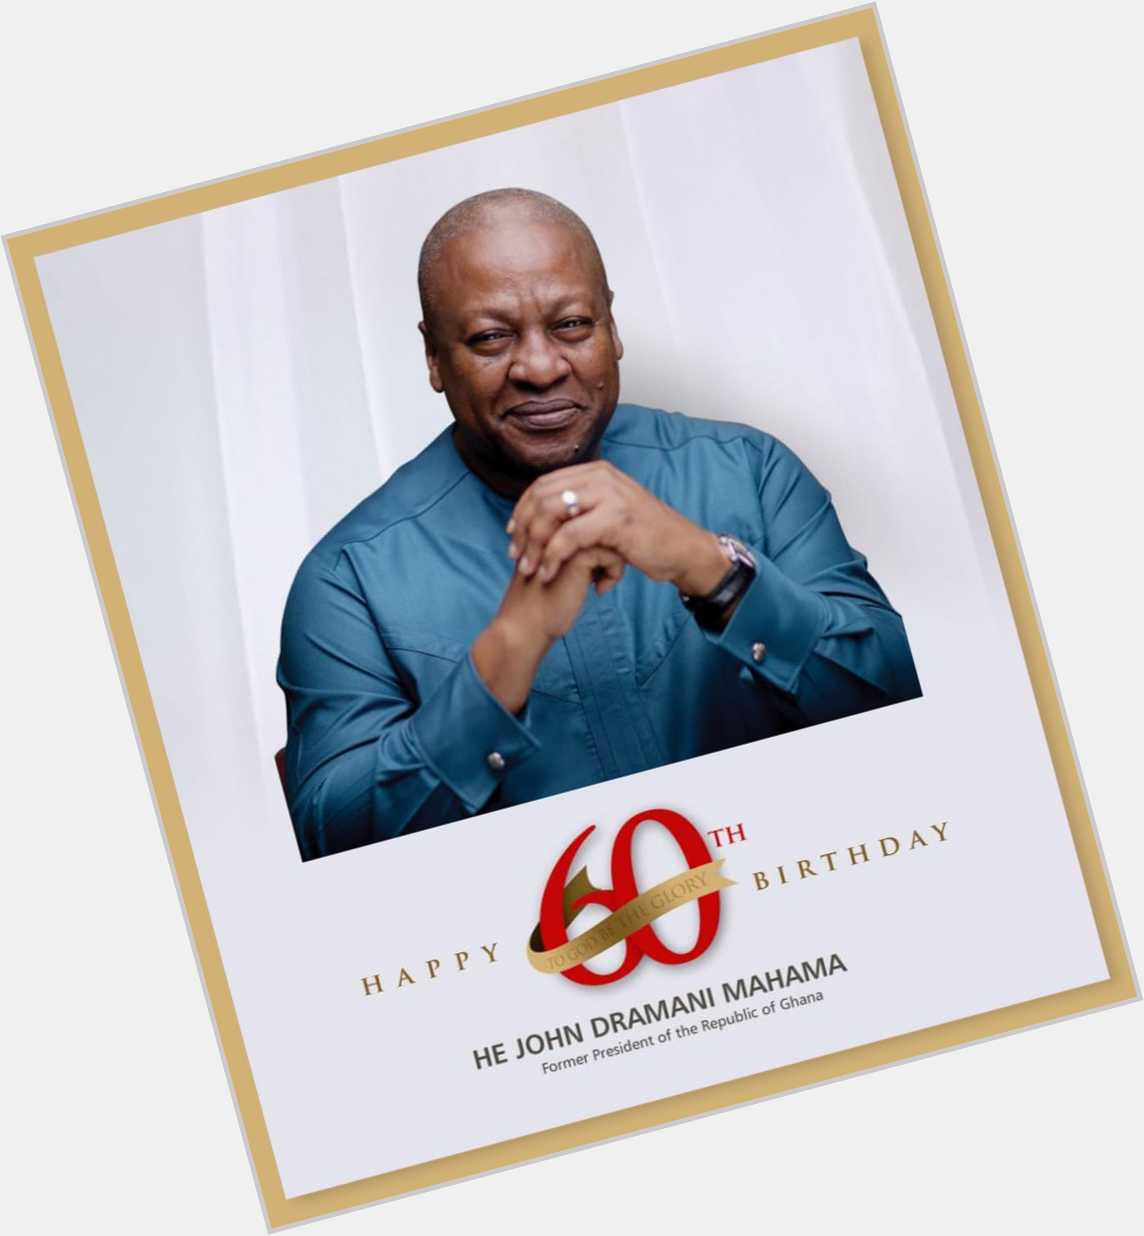 On this special day, we wish the former President, John Dramani Mahama a happy belated Happy birthday. 